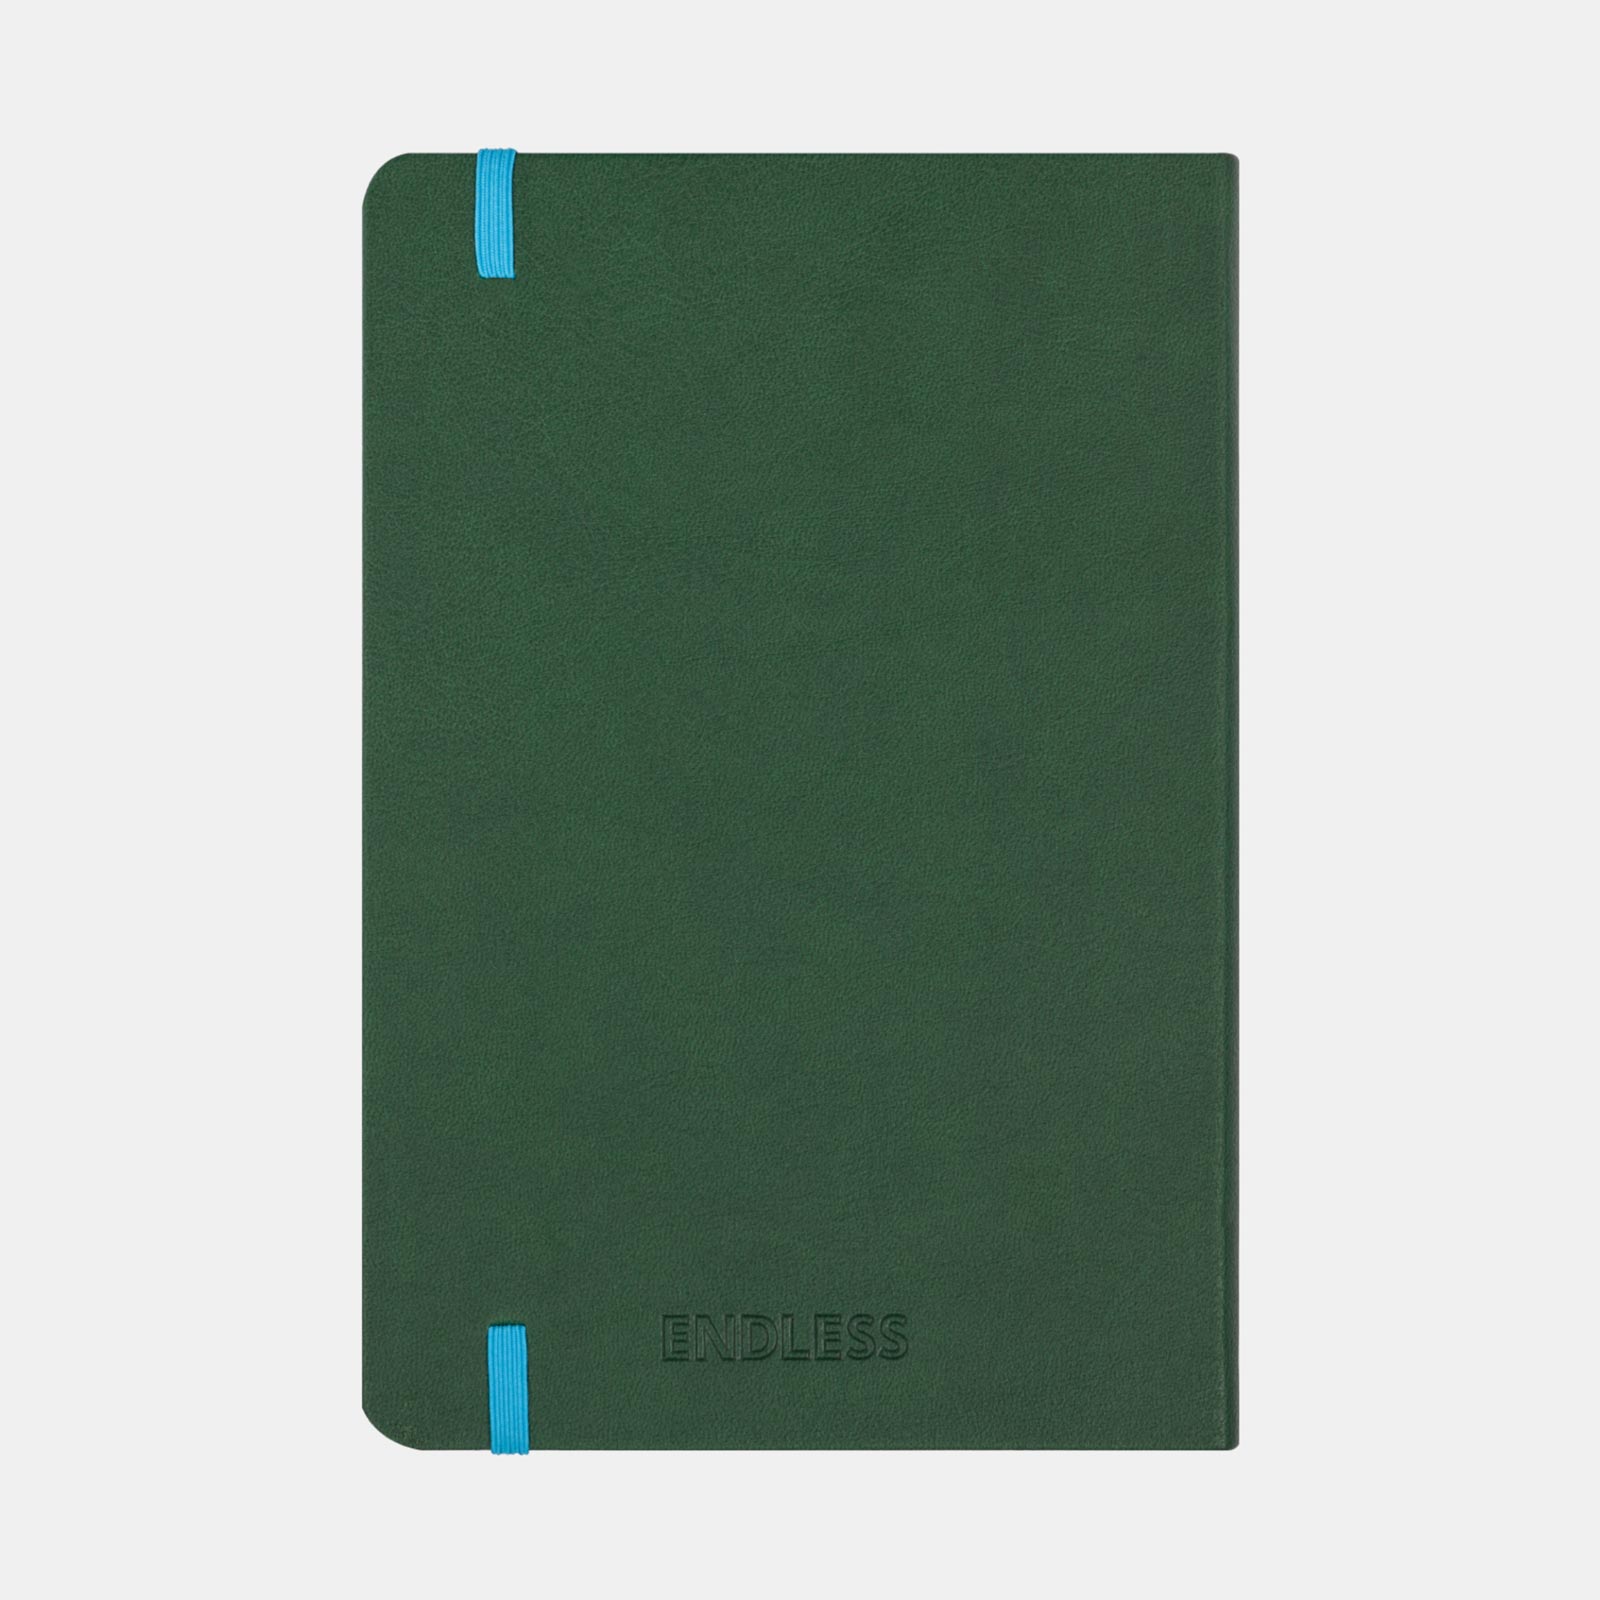 Endless Recorder Notebook Forest Canopy Green